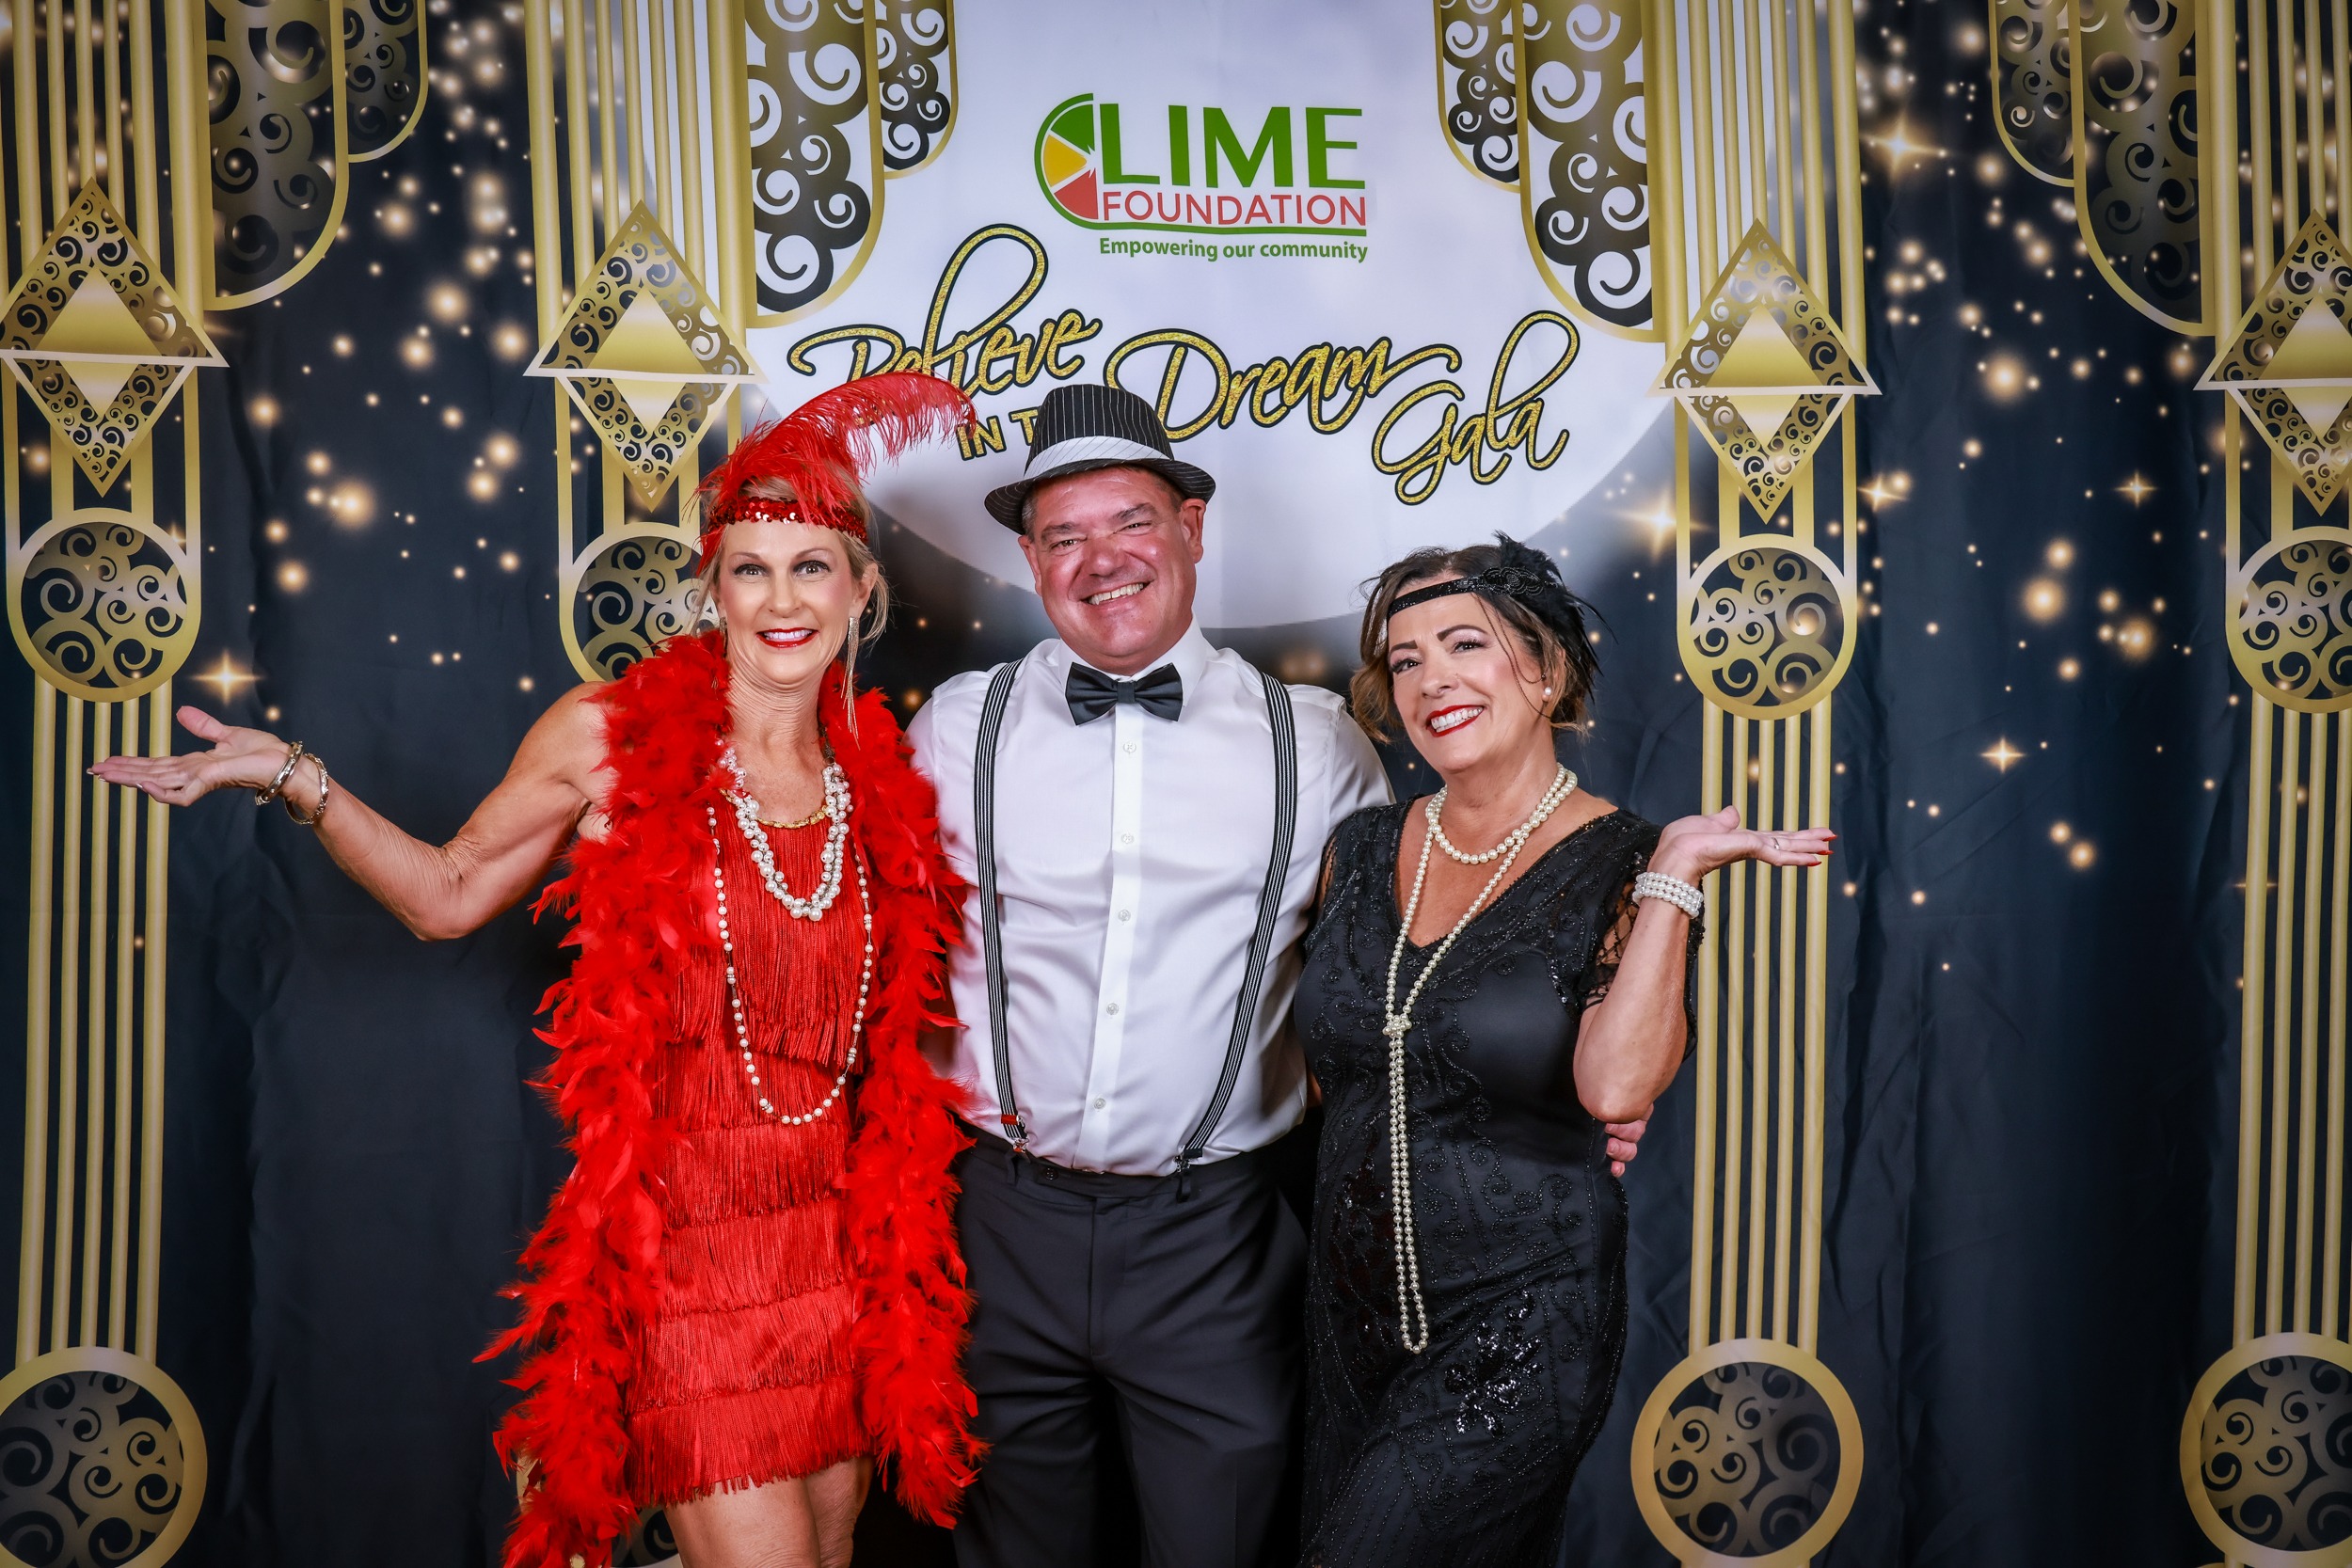 Three people posing for a photo at a Gatsby themed party hosted by The LIME Foundation of Santa Rosa.